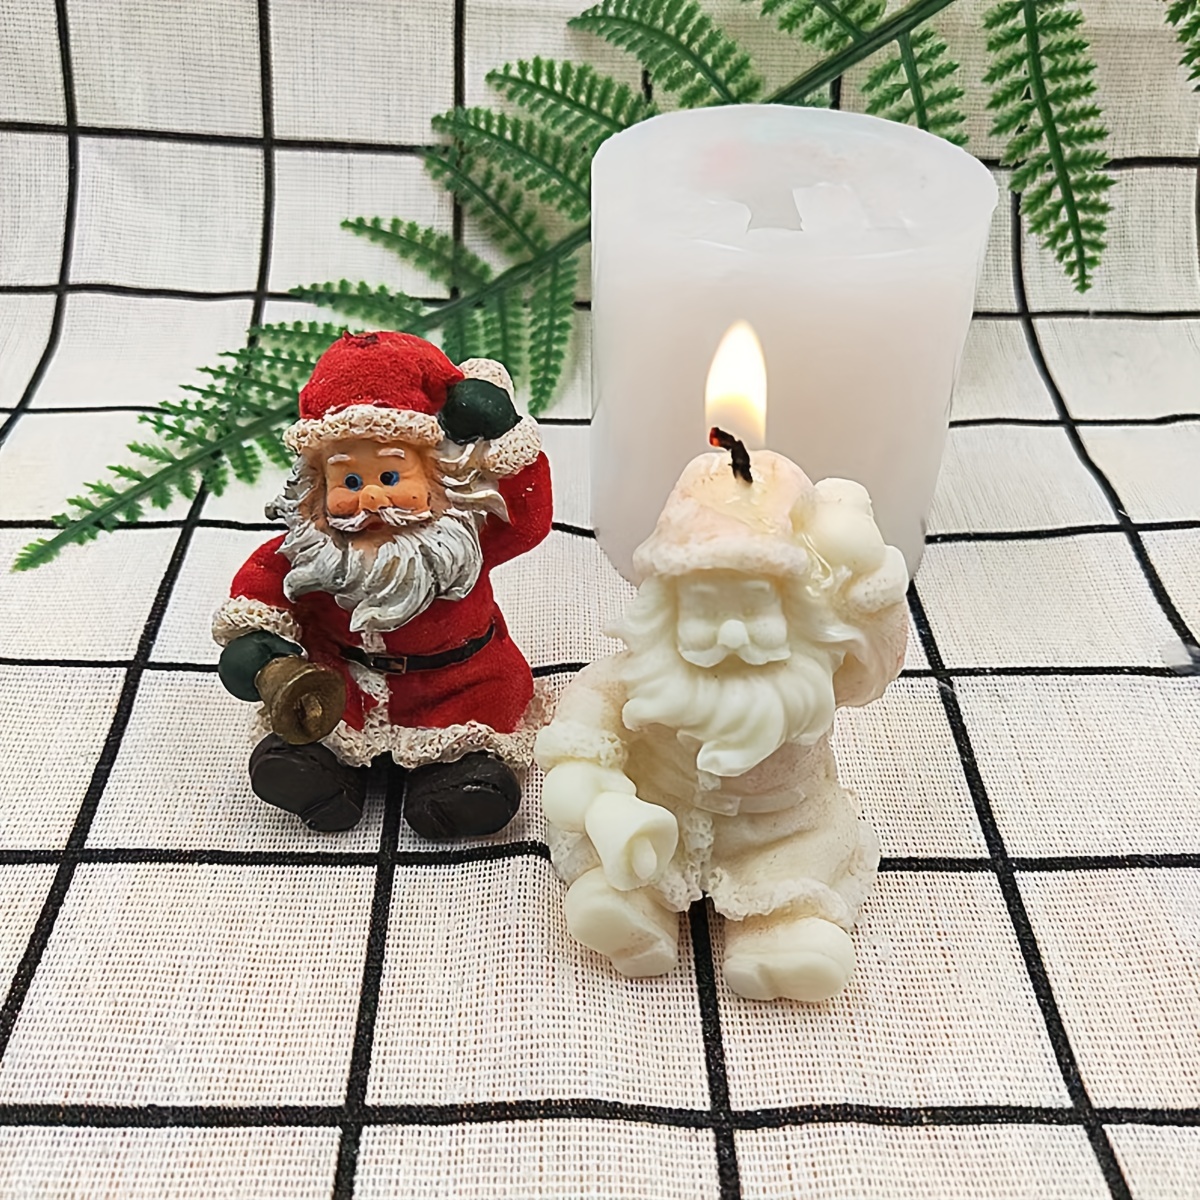 

1pc Christmas Silicone Mold, 3d Santa Claus Fondant Mold, Handmade Soap Aromatherapy Plaster Molds, For Chocolate Craft Fondant Diy Ornaments Home Decoration Gift